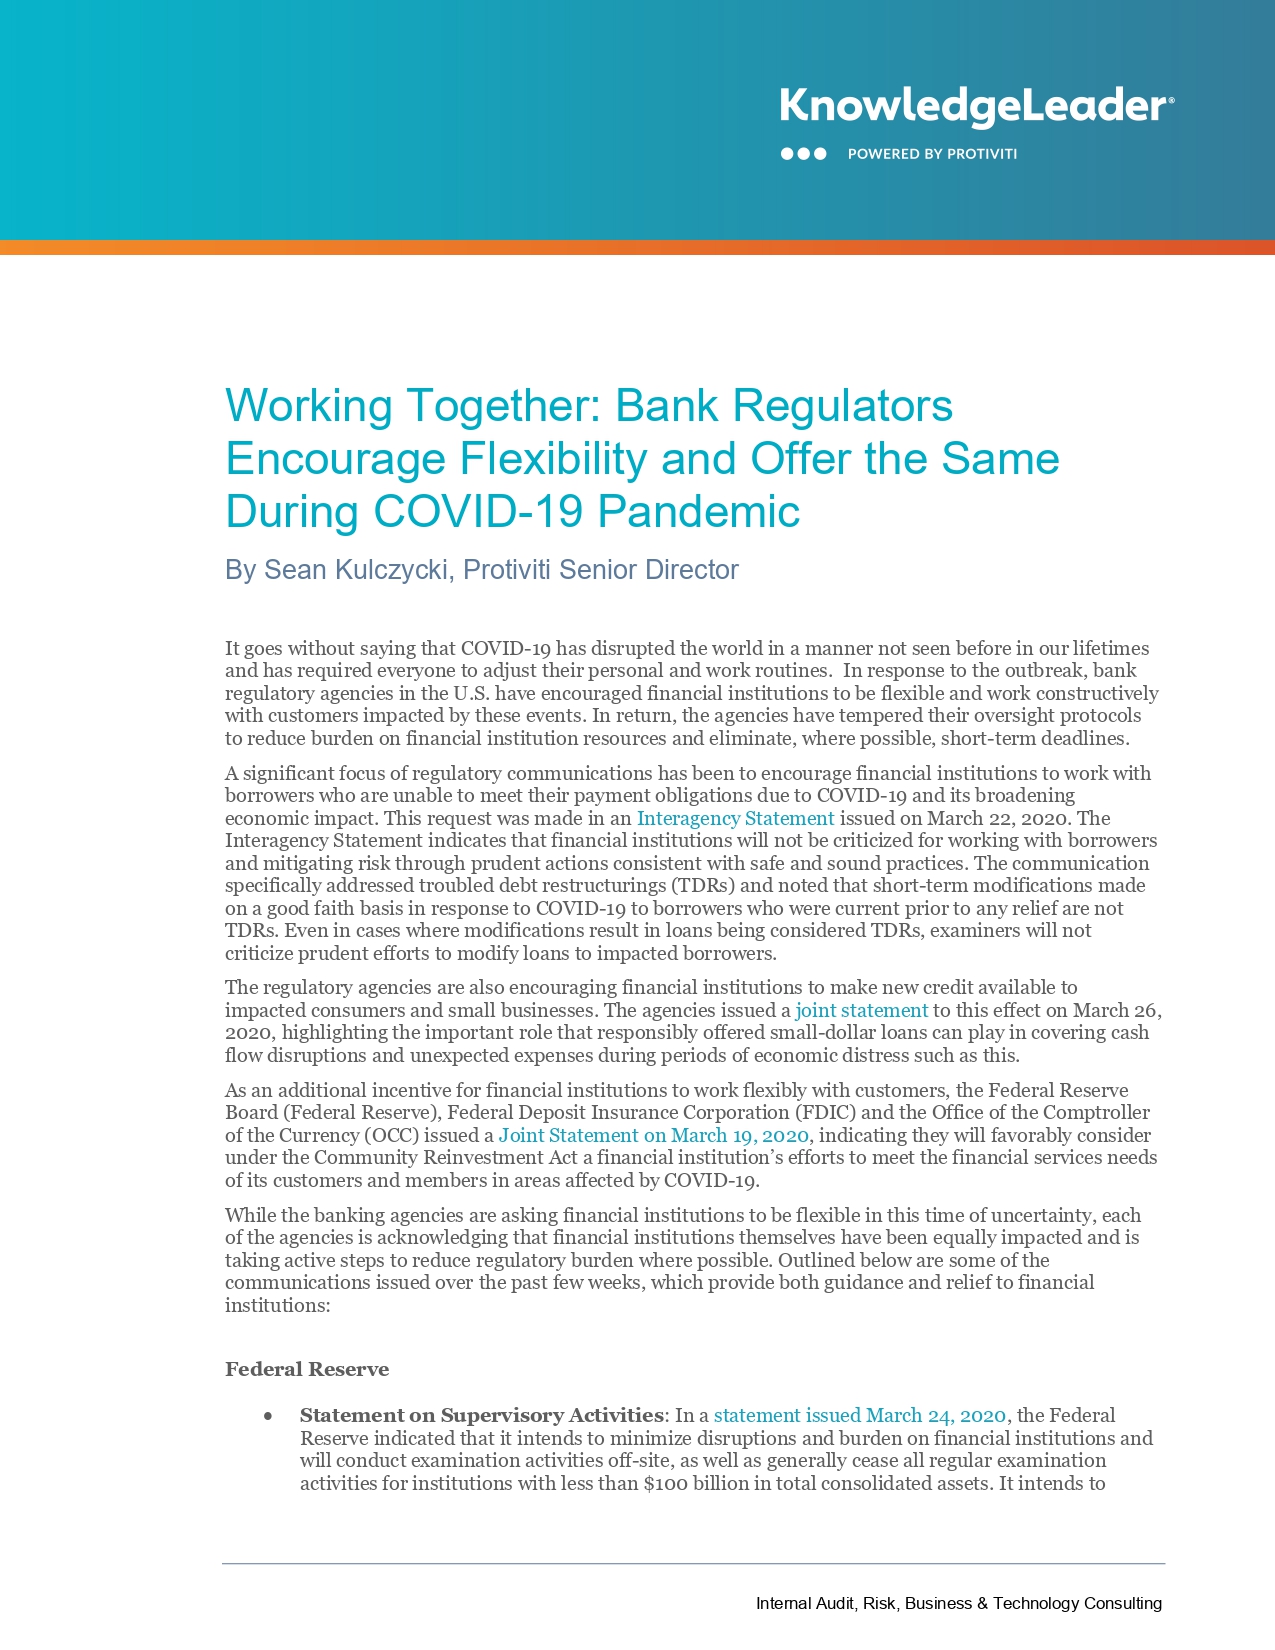 Working Together: Bank Regulators Encourage Flexibility and Offer the Same During COVID-19 Pandemic